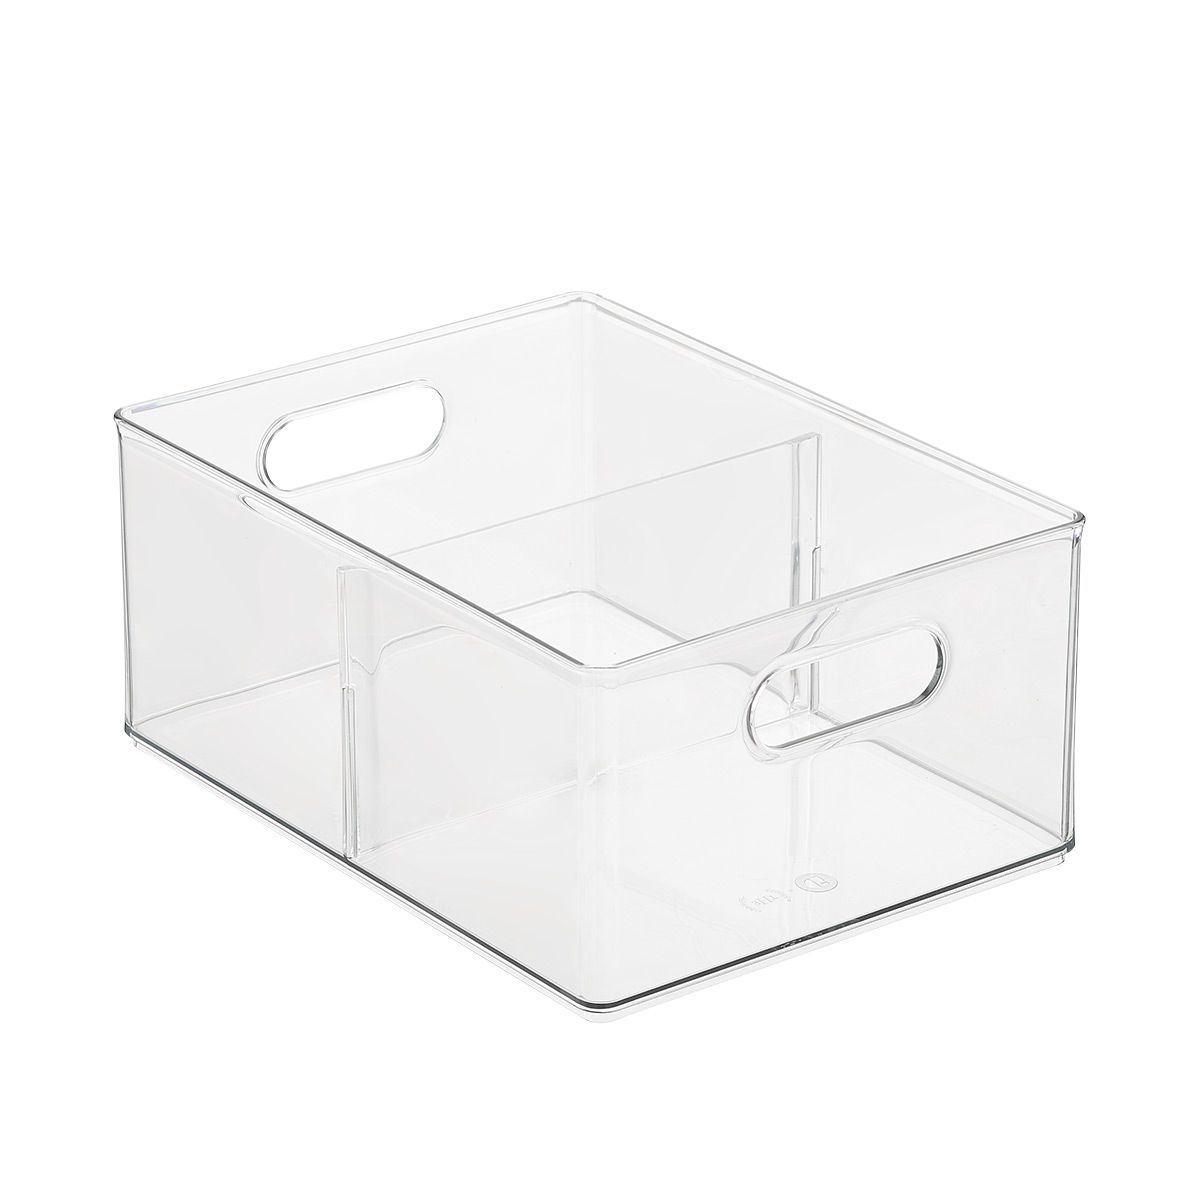 T.H.E. Divided All-Purpose Bin | The Container Store